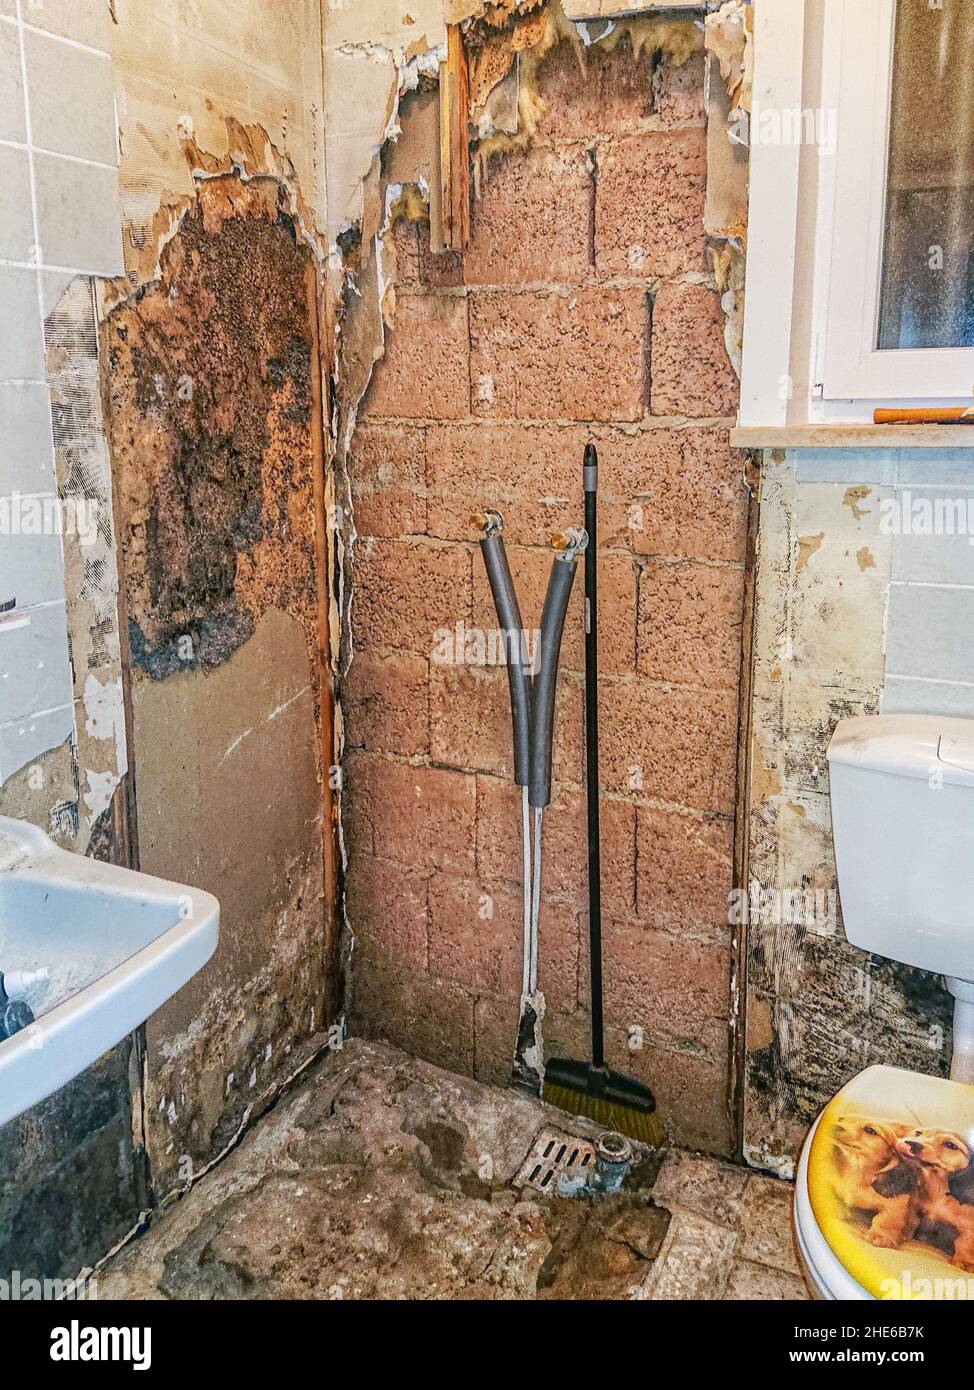 Black dew in a rotten old bathroom with tiles falling from the walls Stock Photo